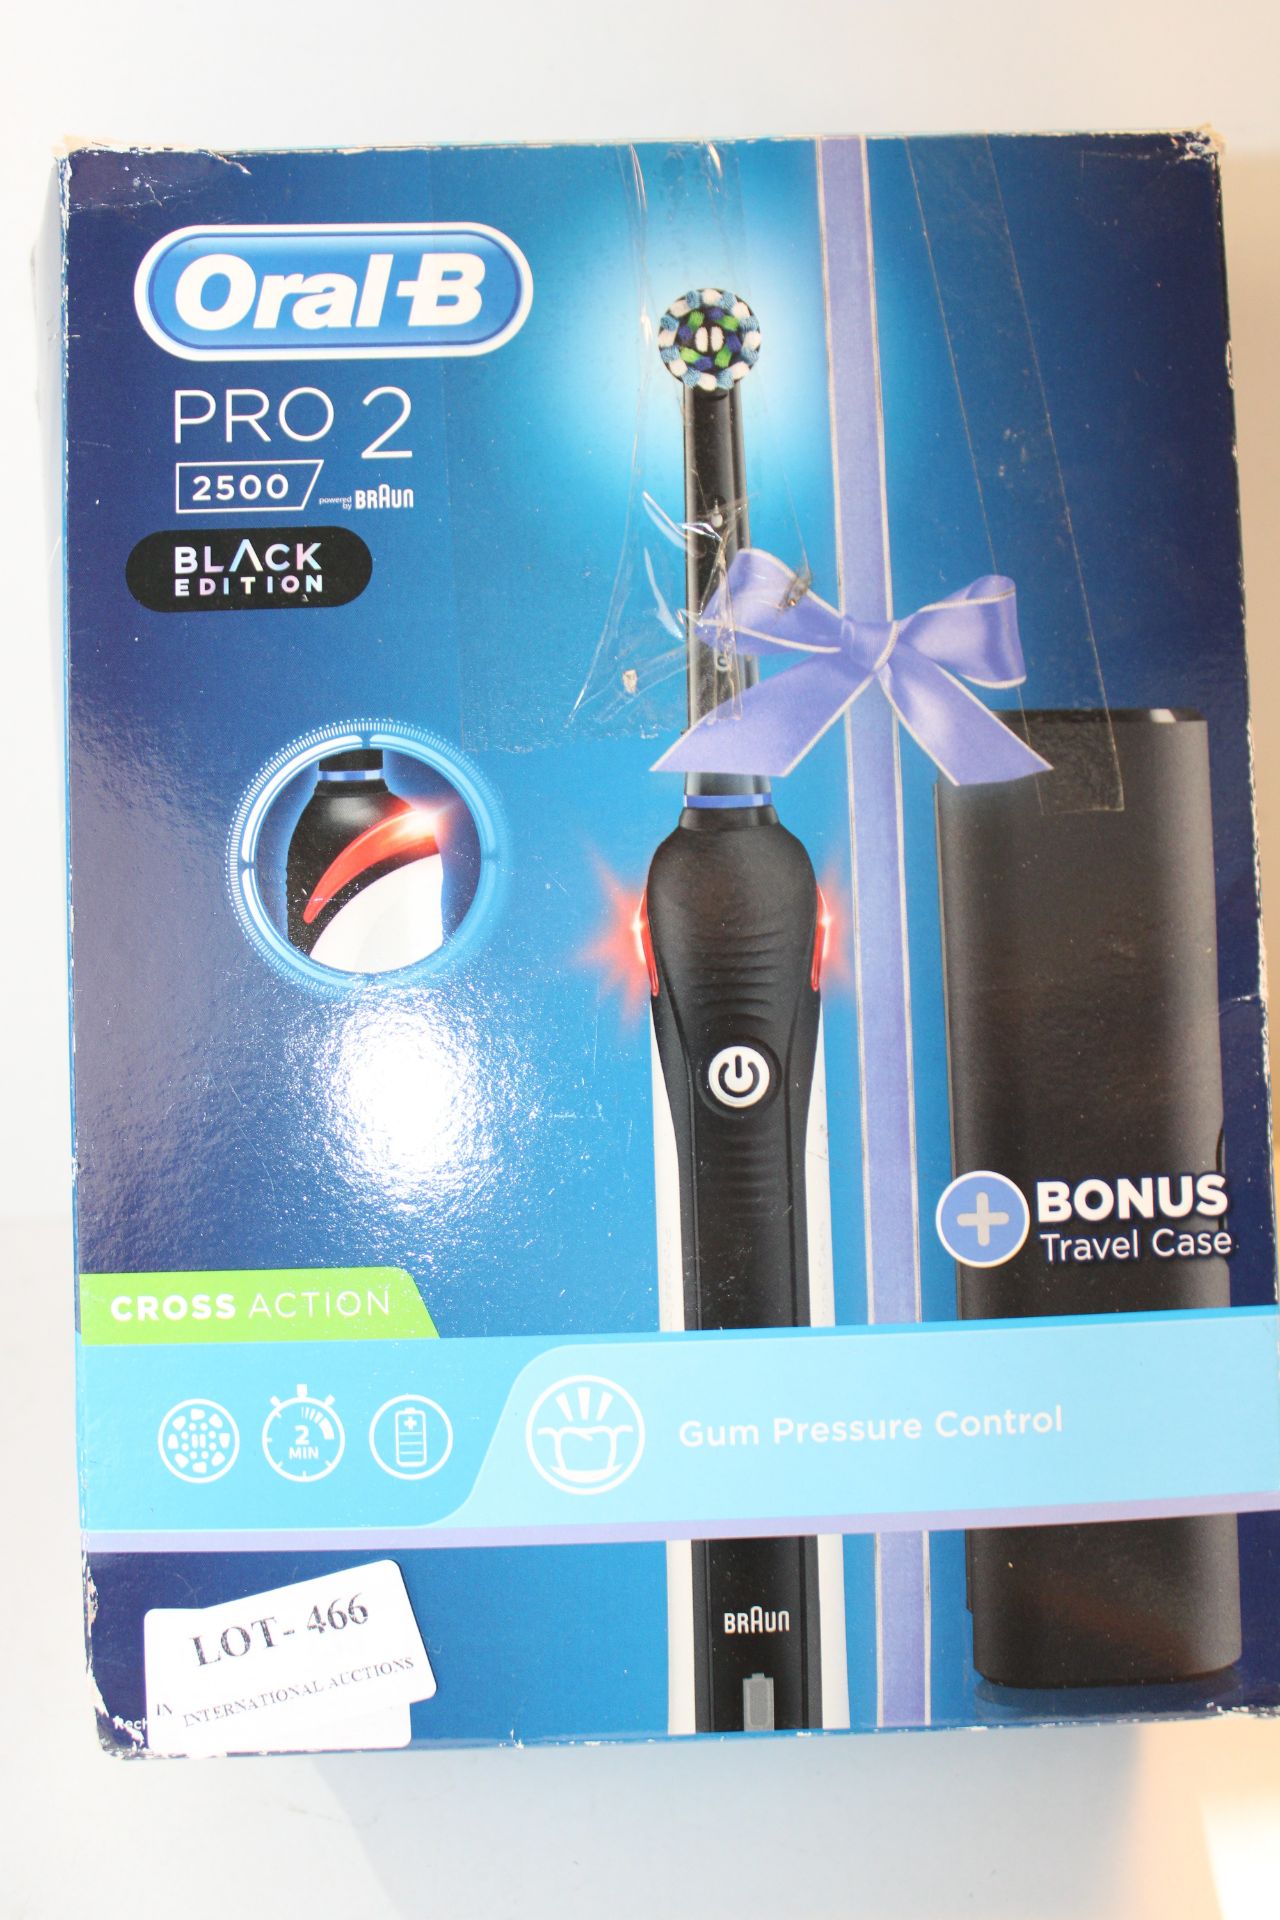 BOXED ORAL B PRO 2 POWERED BY BRAUN 2500 BLACK EDITION TOOTHBRUSH RRP £39.99Condition